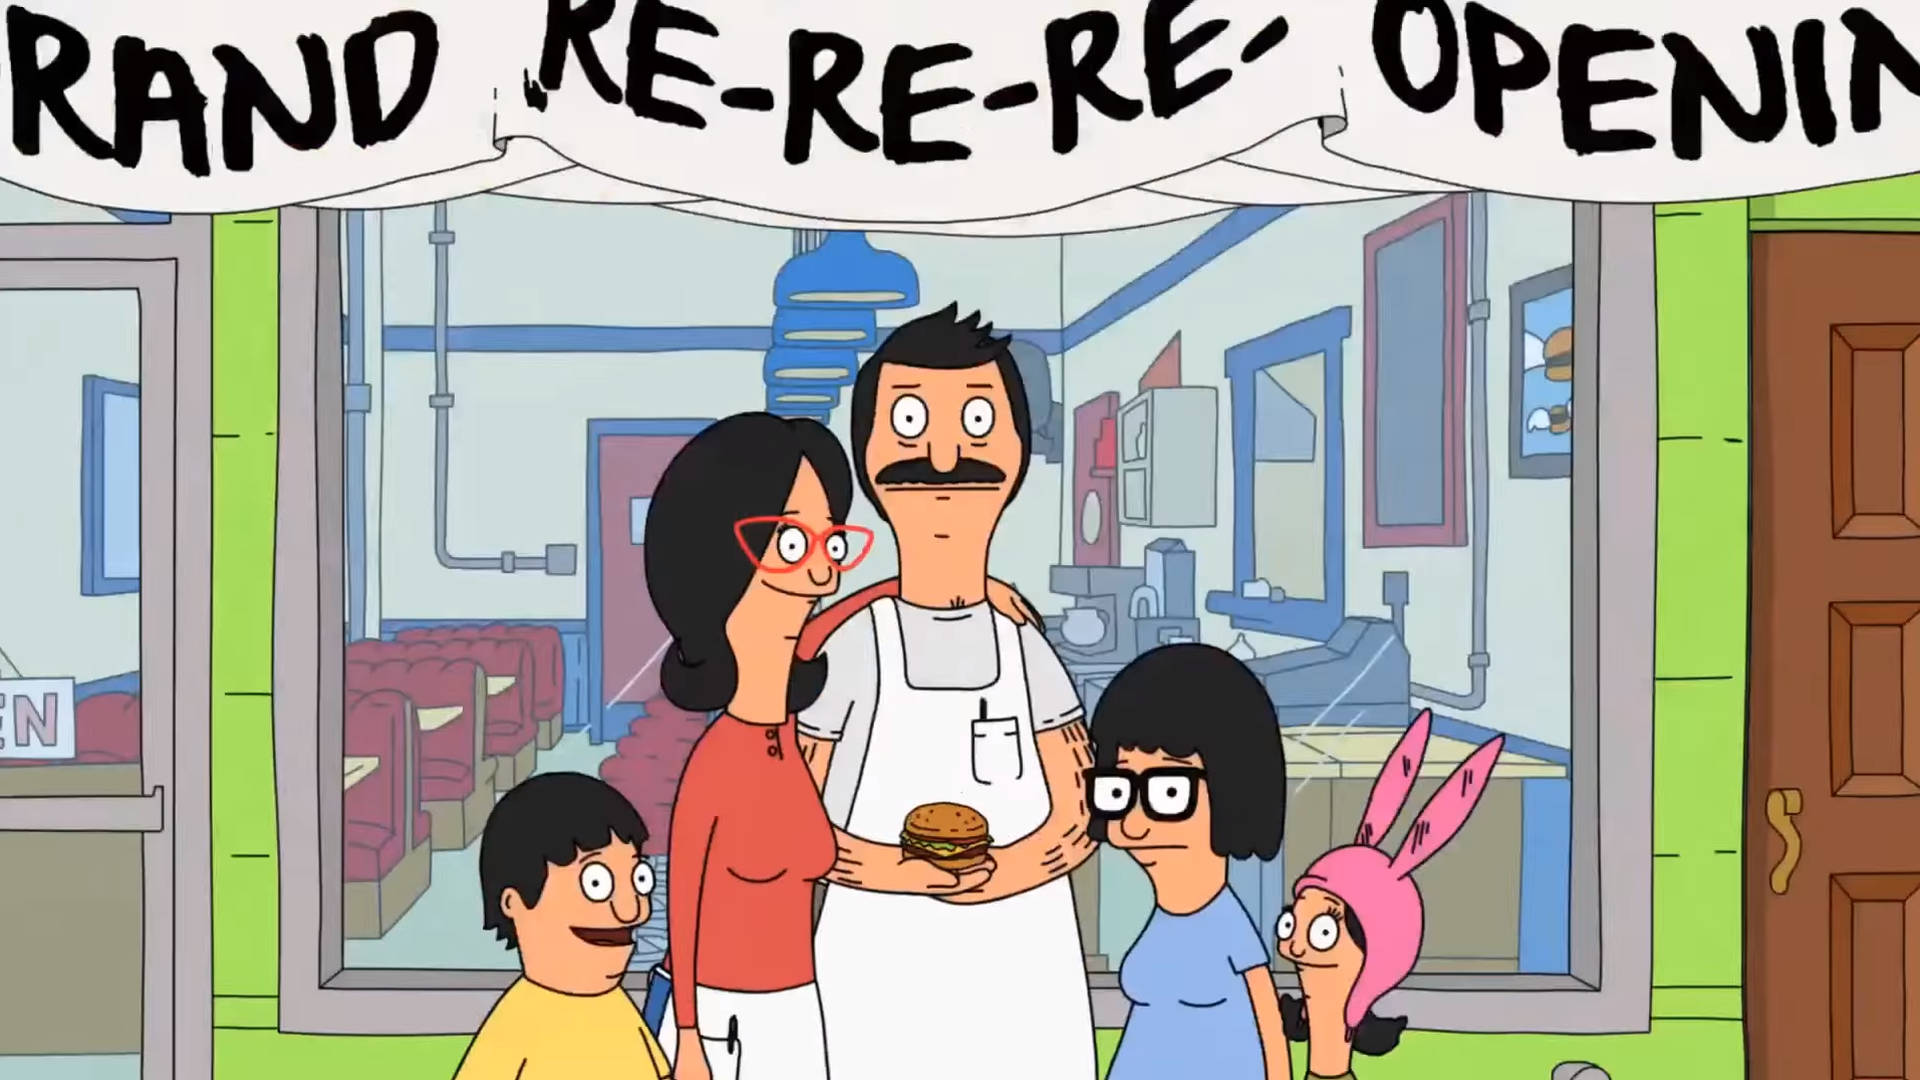 Bobs Burgers Grand Re-re-re-opening